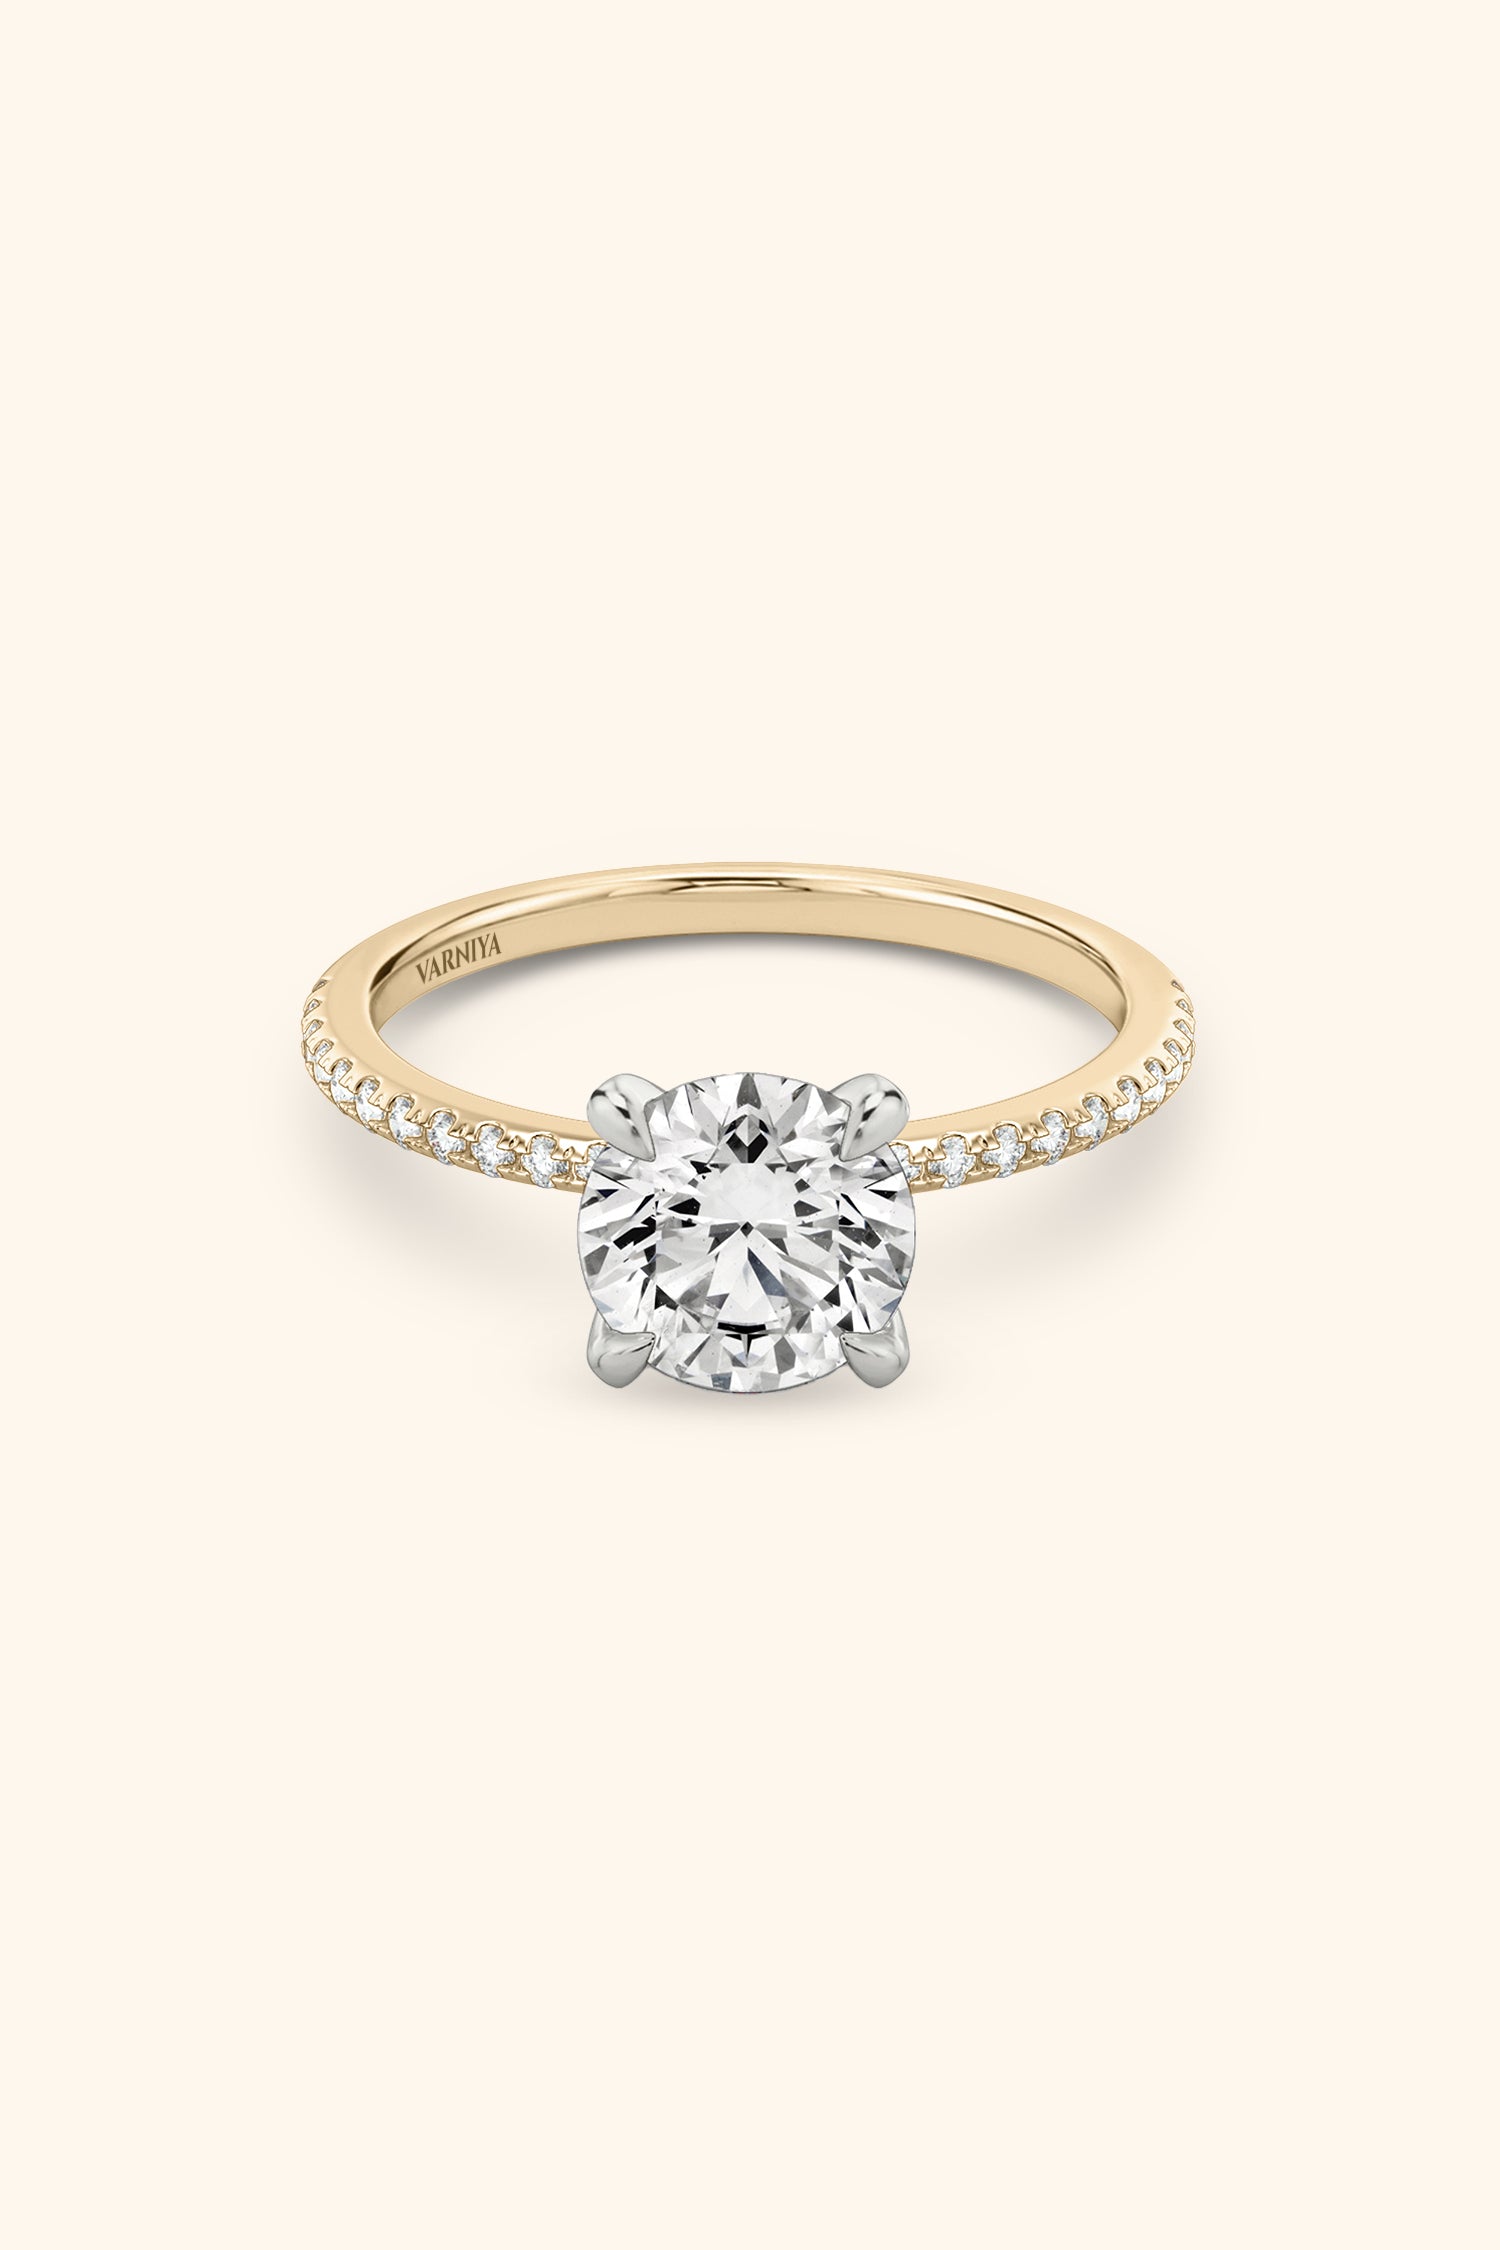 Dual Tone Glance Pave Ring with Round Brilliant Solitaire